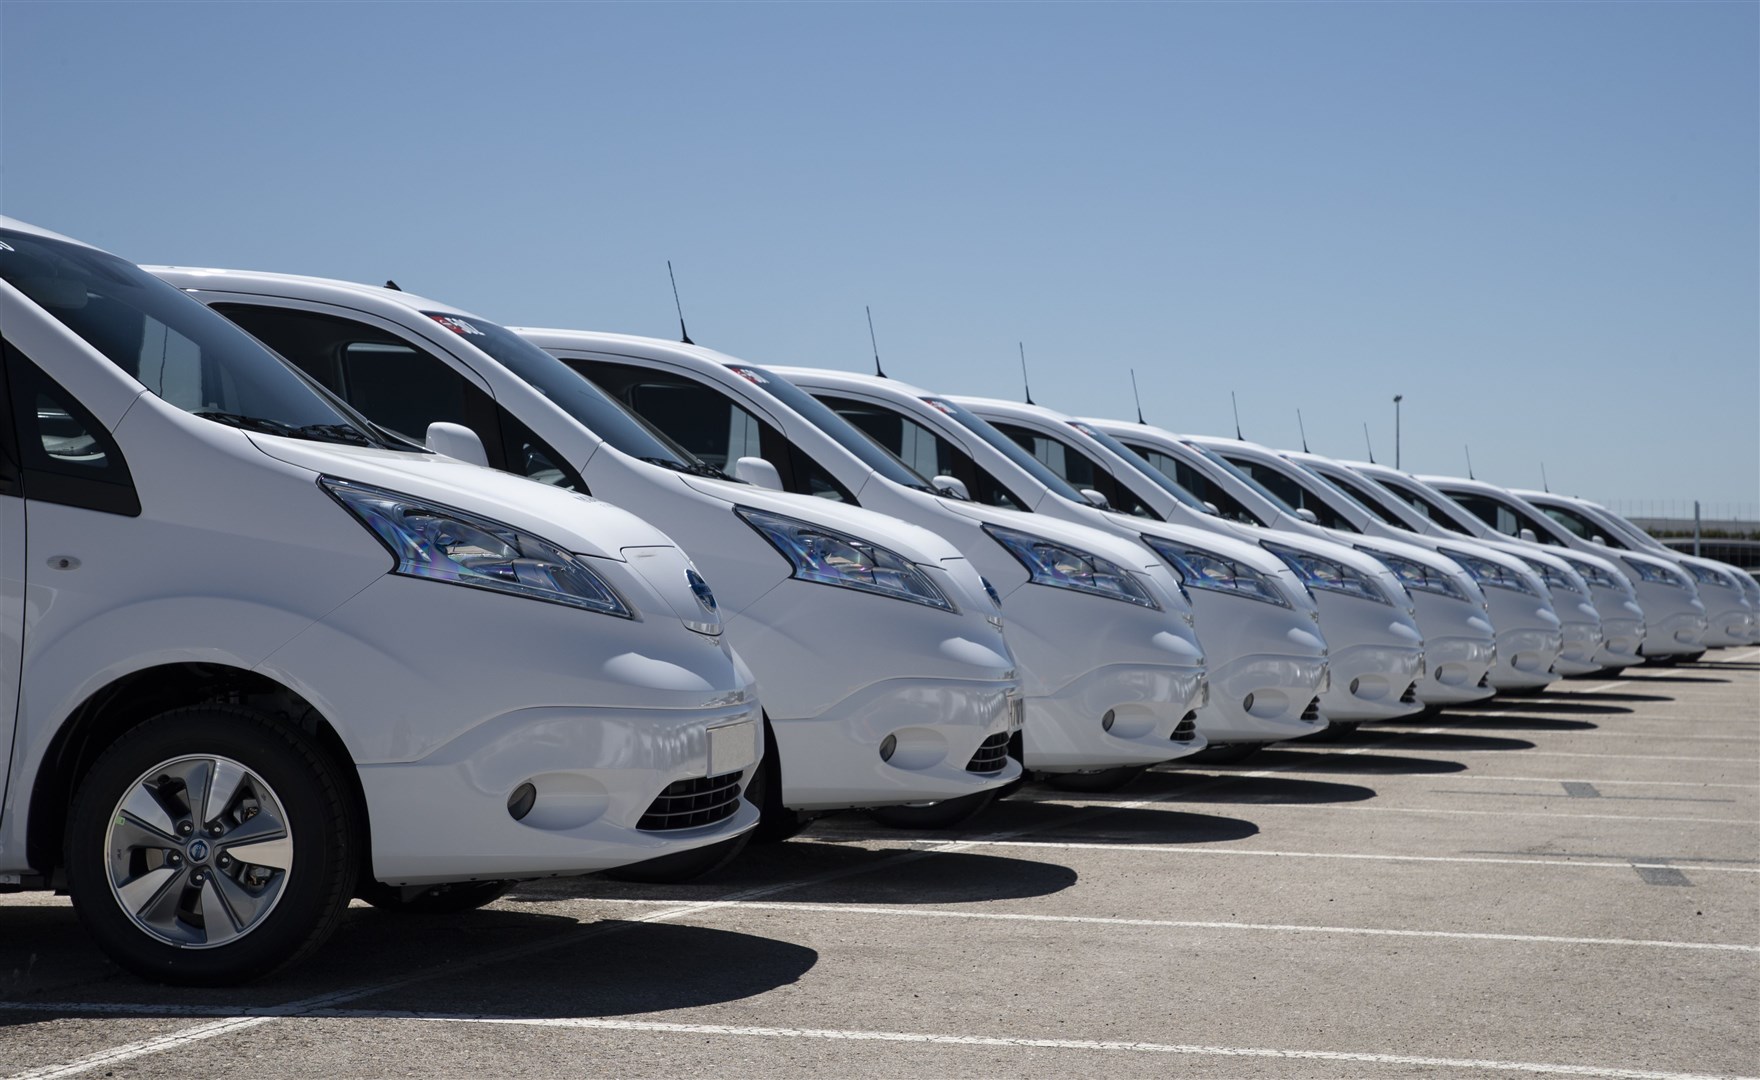 Scottish Water will soon be taking delivery of a fleet of Nissan e-NV200 vans.